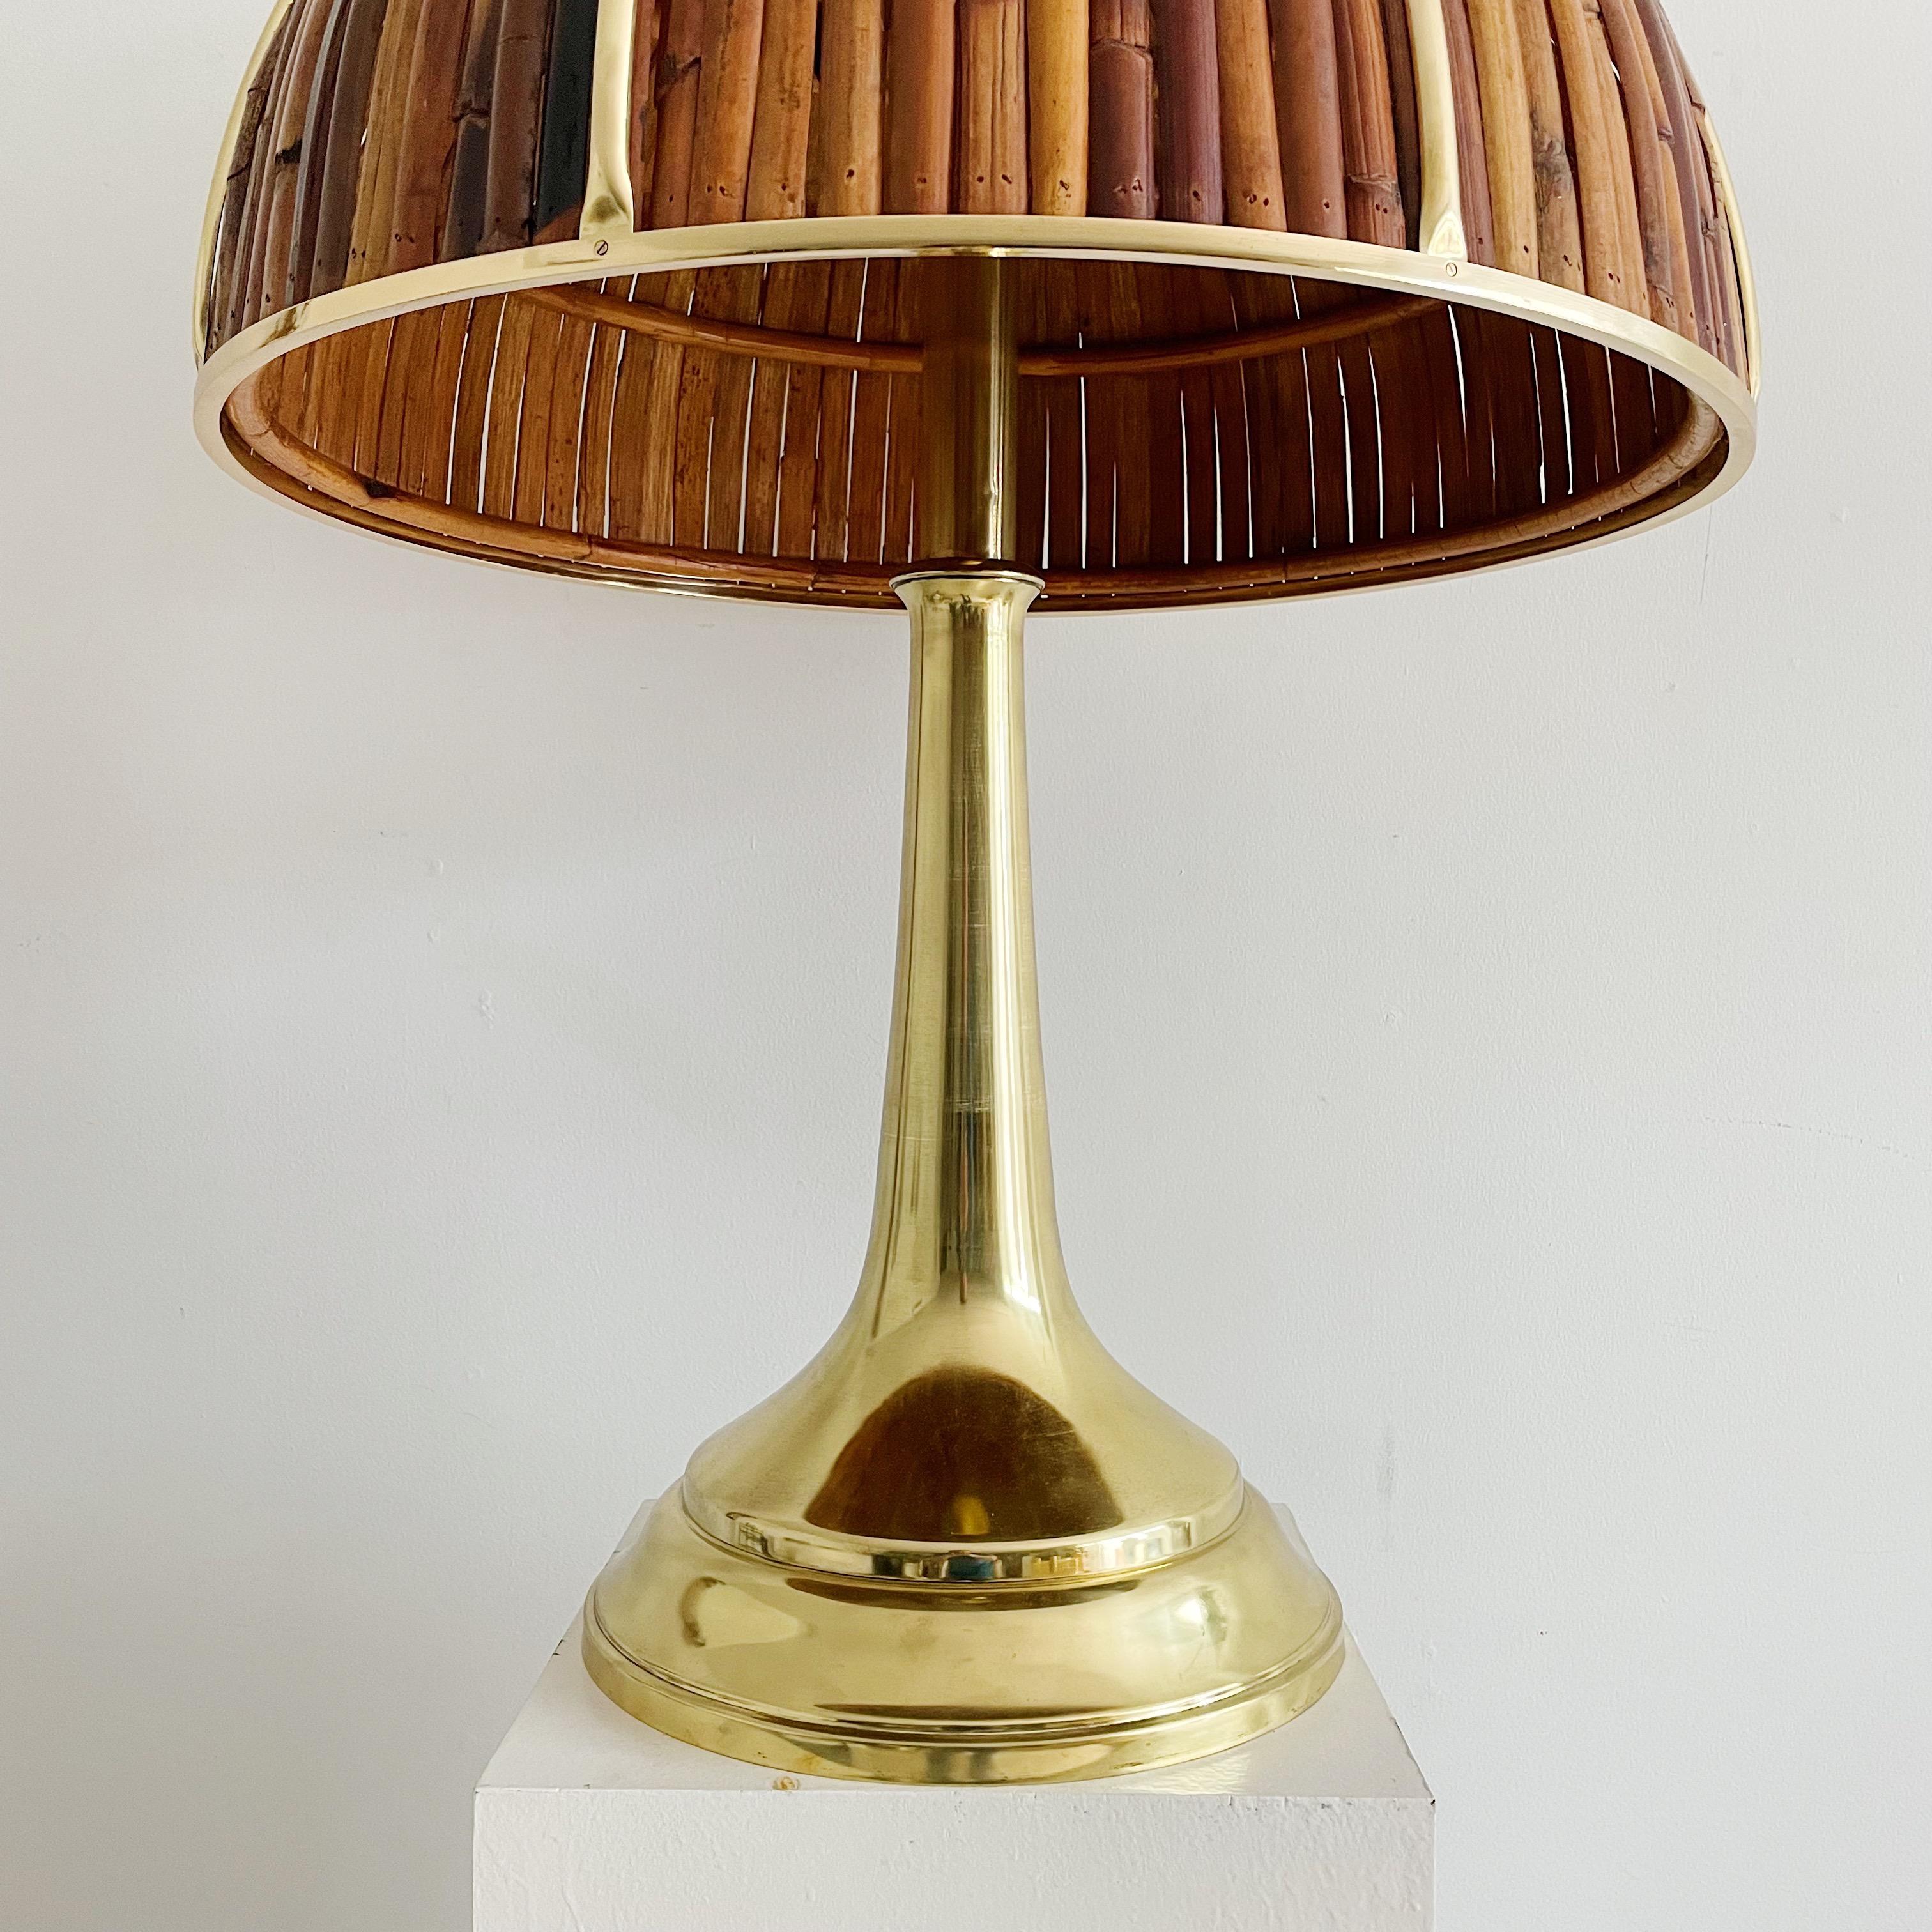 Hand-Crafted Pair of Gabriella Crespi Large Fungo Table Lamps, Rising Sun Series, 1973, Italy